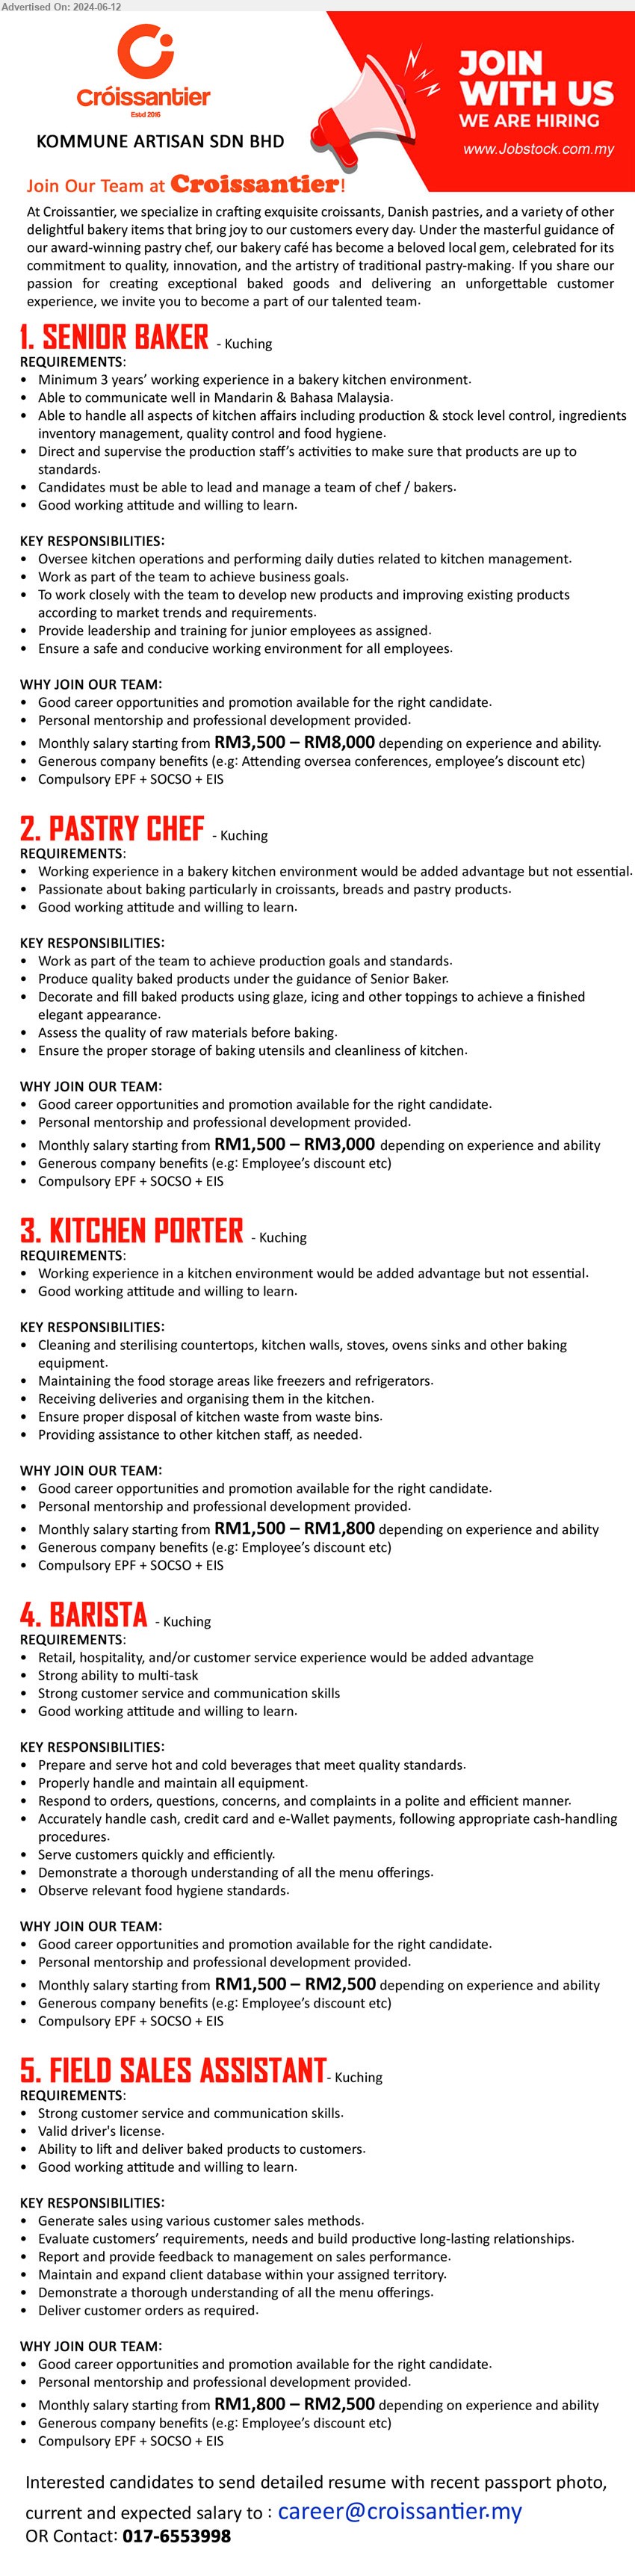 KOMMUNE ARTISAN SDN BHD - 1. SENIOR BAKER (Kuching), RM3,500 – RM8,000, Minimum 3 years’ working experience in a bakery kitchen environment.,...
2. PASTRY CHEF (Kuching), RM1,500 – RM3,000, Working experience in a bakery kitchen environment would be added advantage but not essential.,...
3. KITCHEN PORTER  (Kuching), RM1,500 – RM1,800, Working experience in a kitchen environment would be added advantage but not essential,...
4. BARISTA  (Kuching), RM1,500 – RM2,500, Retail, hospitality, and/or customer service experience would be added advantage,...
5. FIELD SALES ASSISTANT (Kuching), RM1,800 – RM2,500, Valid driver's license, Ability to lift and deliver baked products to customers....
Call 017-6553998 / Email resume to ...
